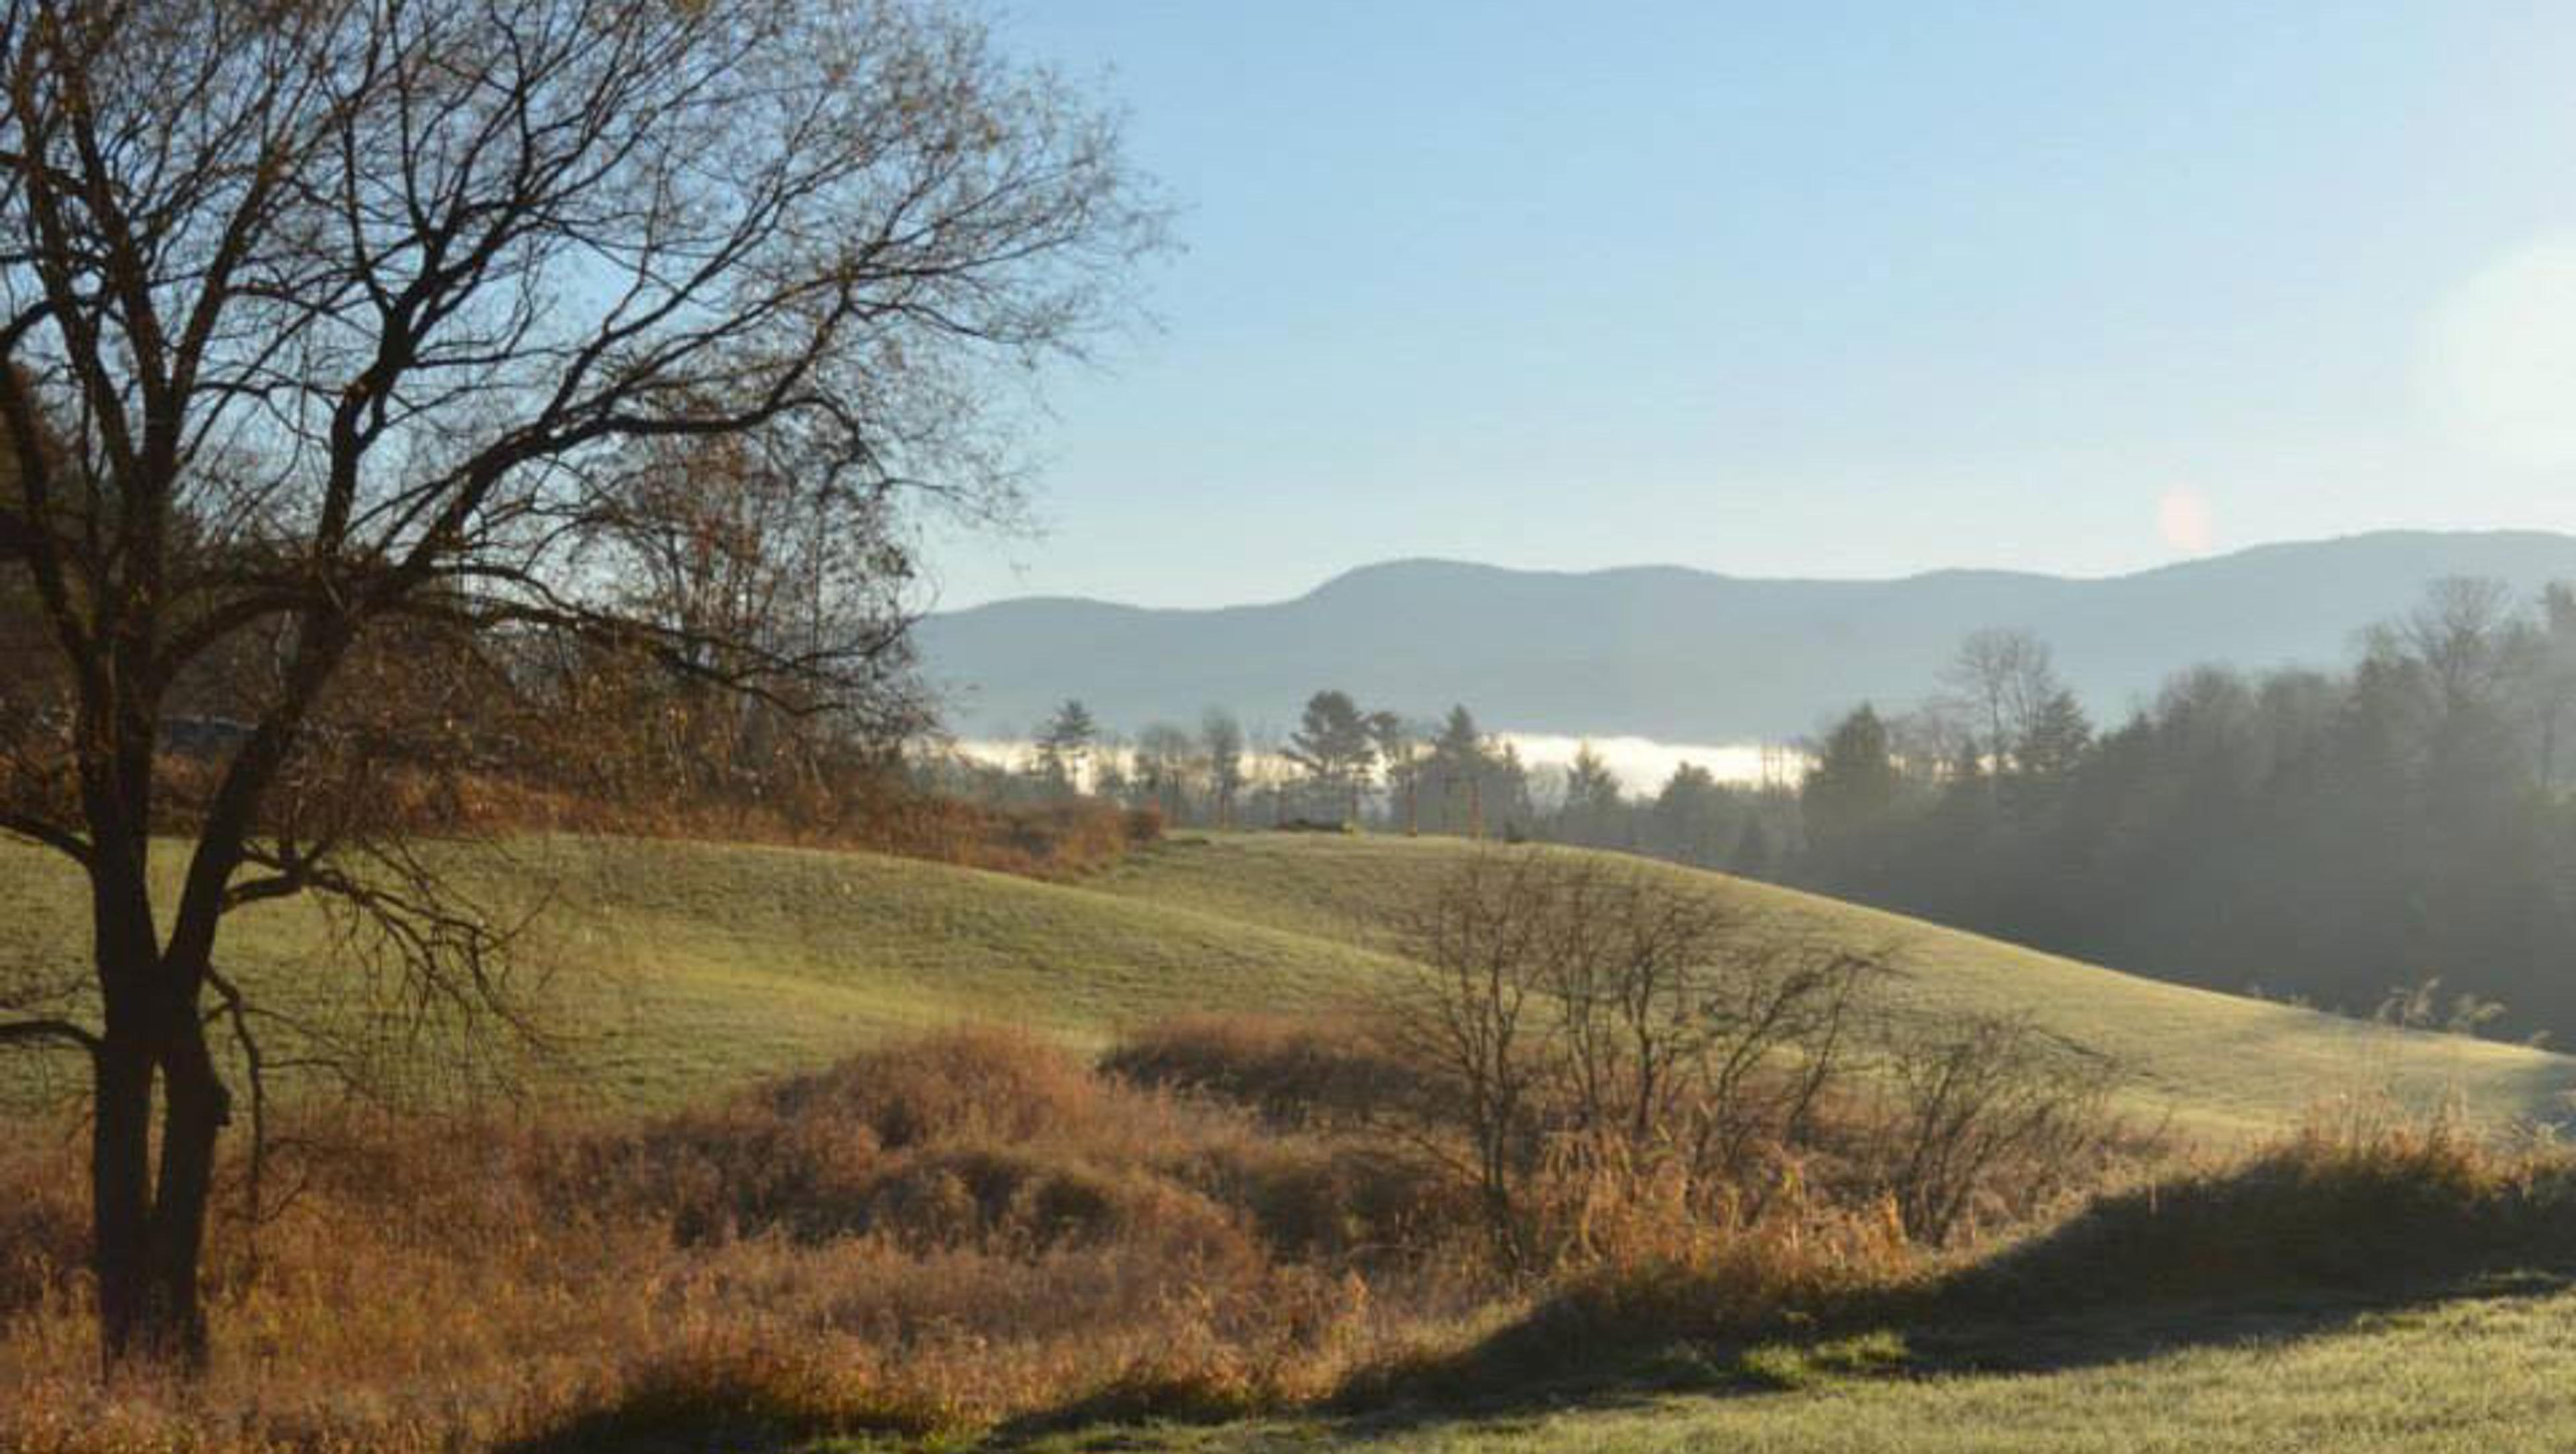 Situated in the beautiful Vermont hills, Karme Choling meditation retreat center